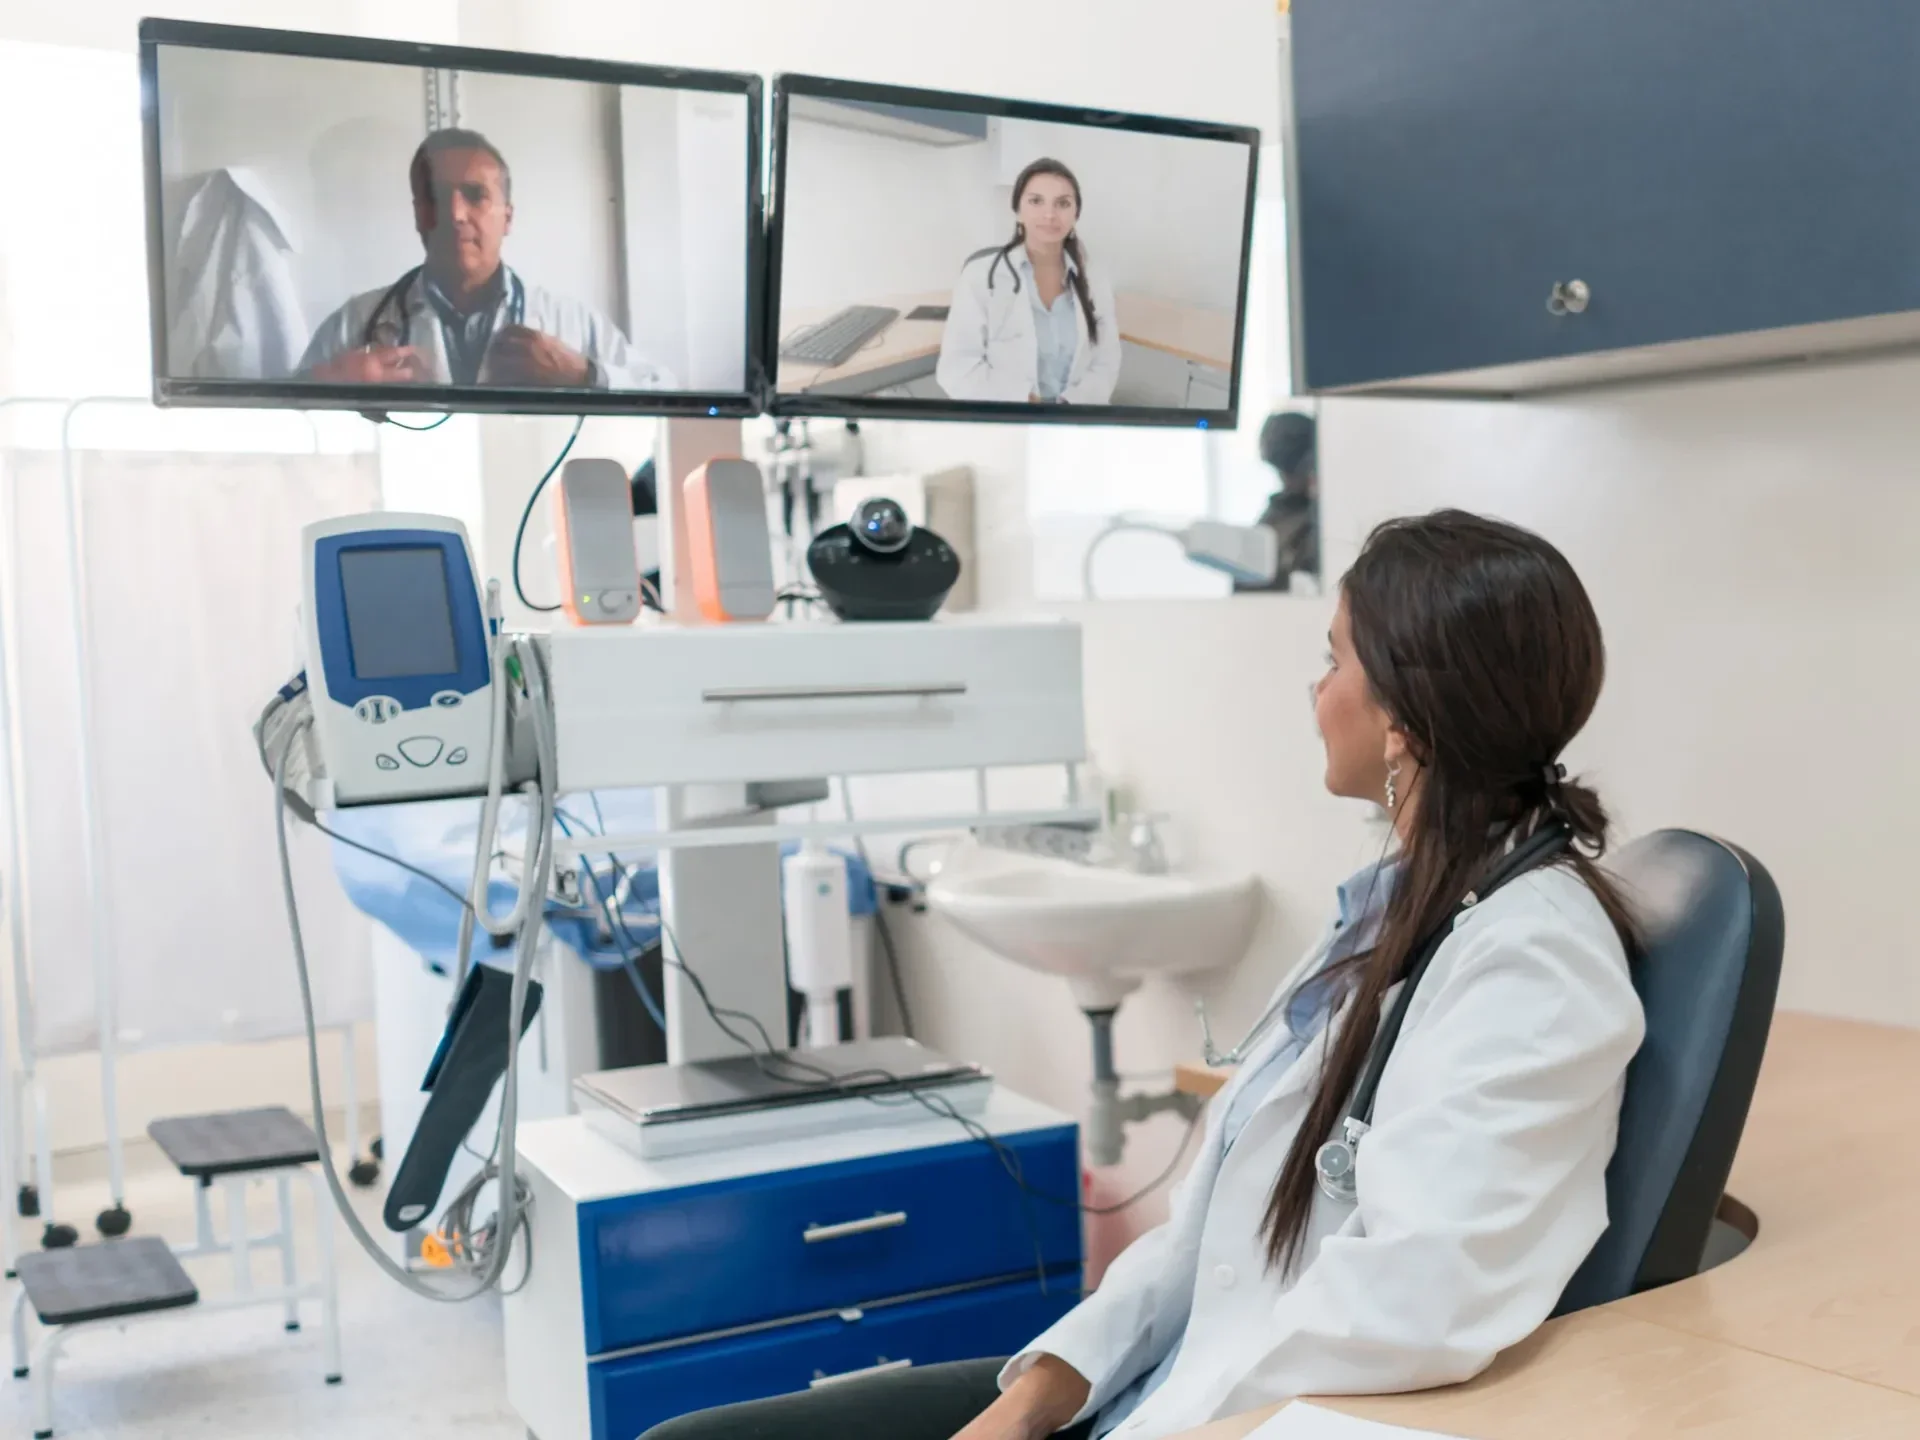 Doctors using video conferencing